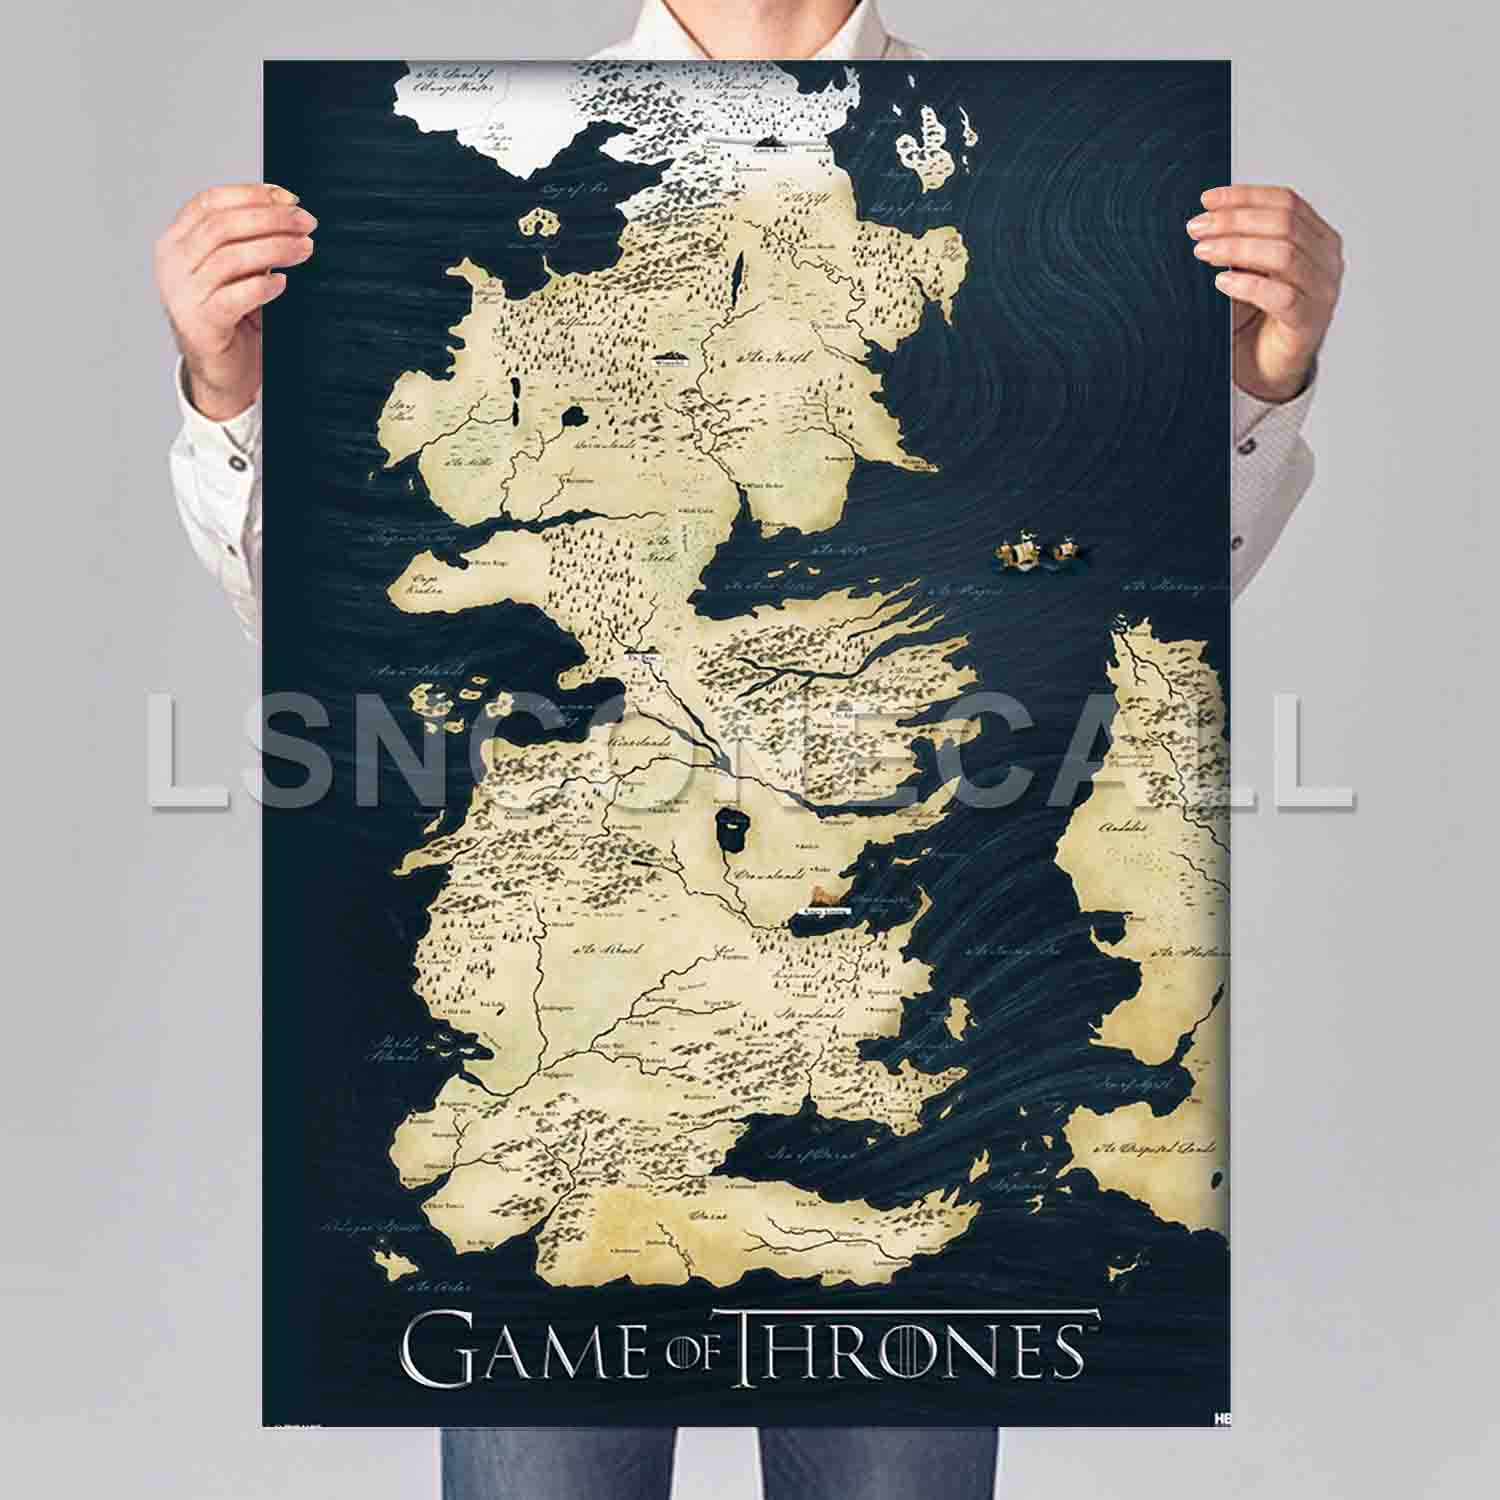 Game Of Thrones Map Poster Print Art Wall Decor Lsnconecall